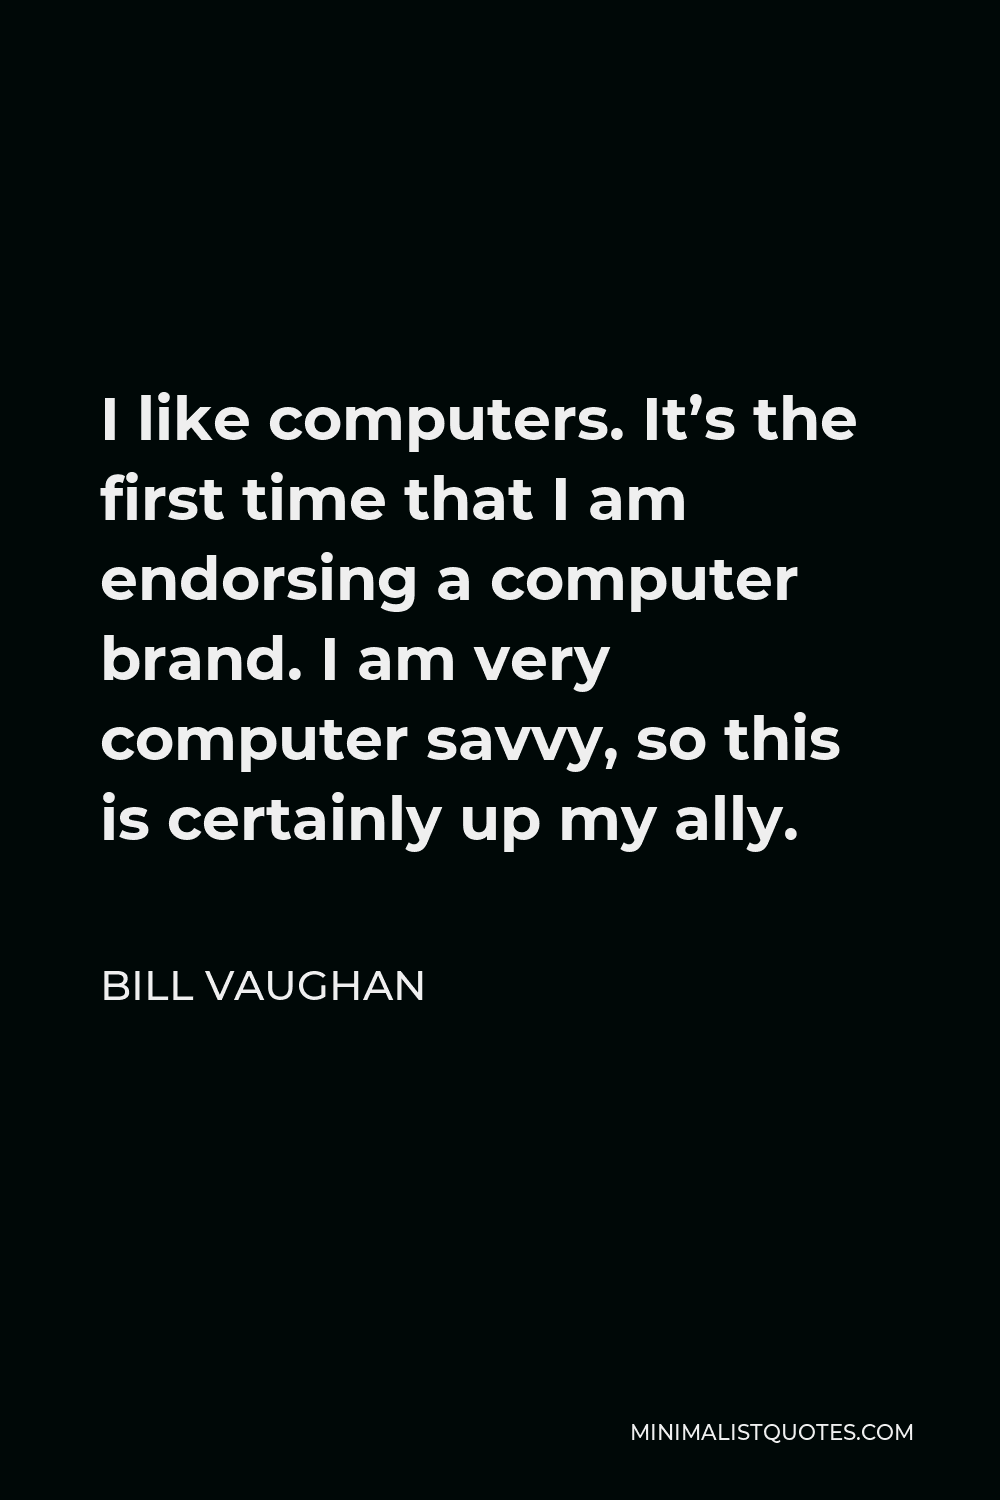 Bill Vaughan Quote - I like computers. It’s the first time that I am endorsing a computer brand. I am very computer savvy, so this is certainly up my ally.